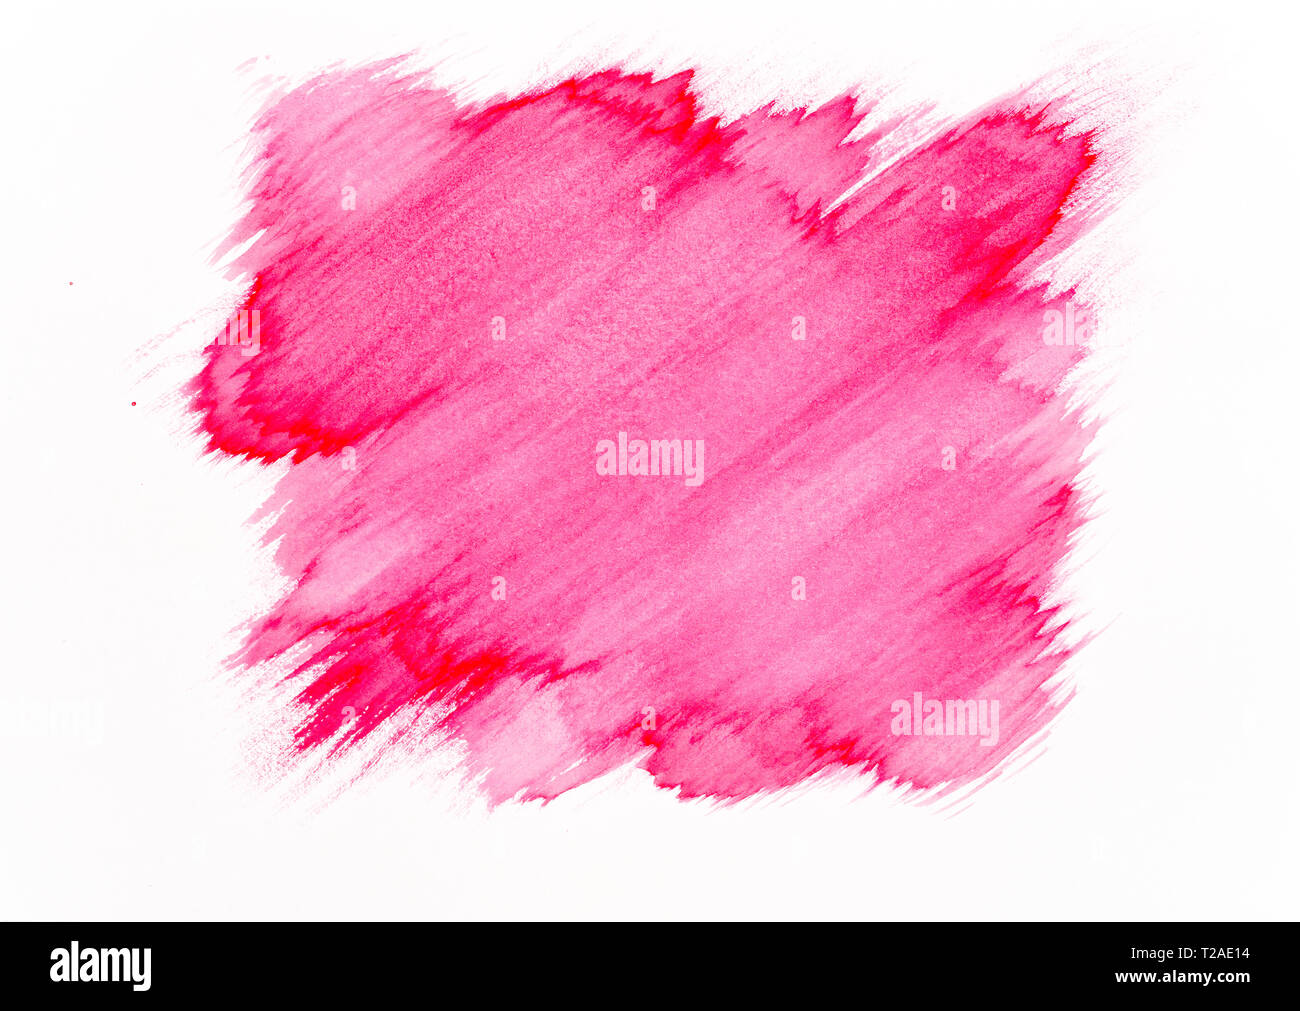 Red watercolor brush stroke on white paper background Stock Photo - Alamy